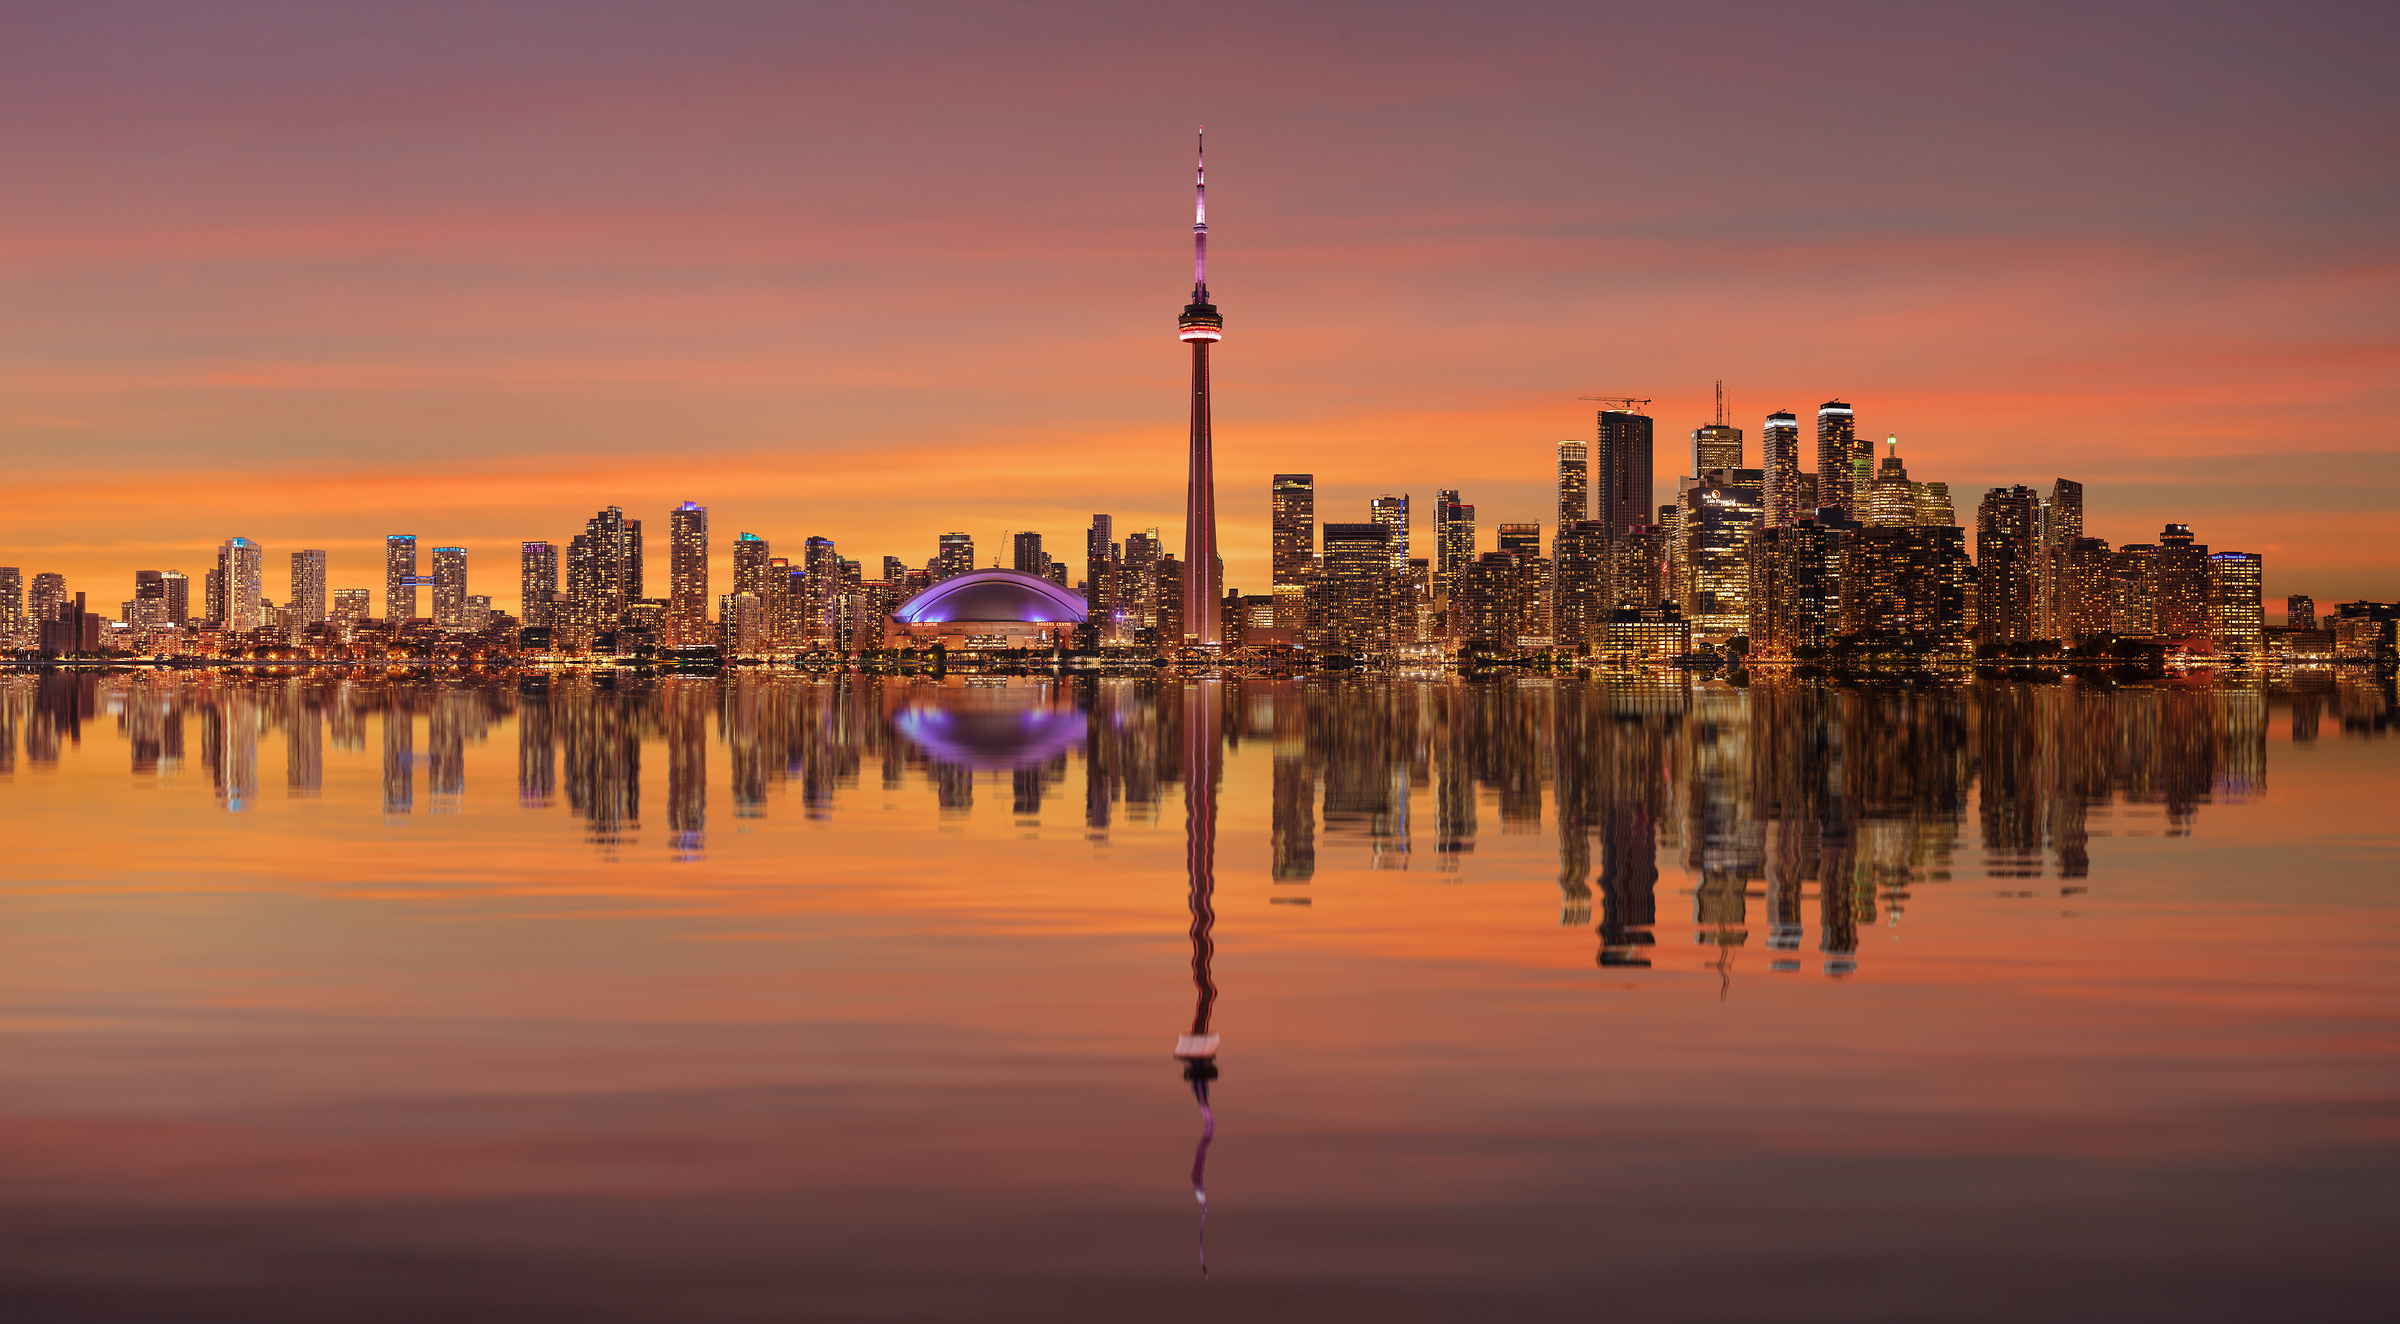 3,204 megapixels! A very high resolution, large-format VAST photo print of the Toronto skyline at sunset with a reflection in Lake Ontario; cityscape photograph created by Chris Collacott in Toronto, Ontario, Canada.